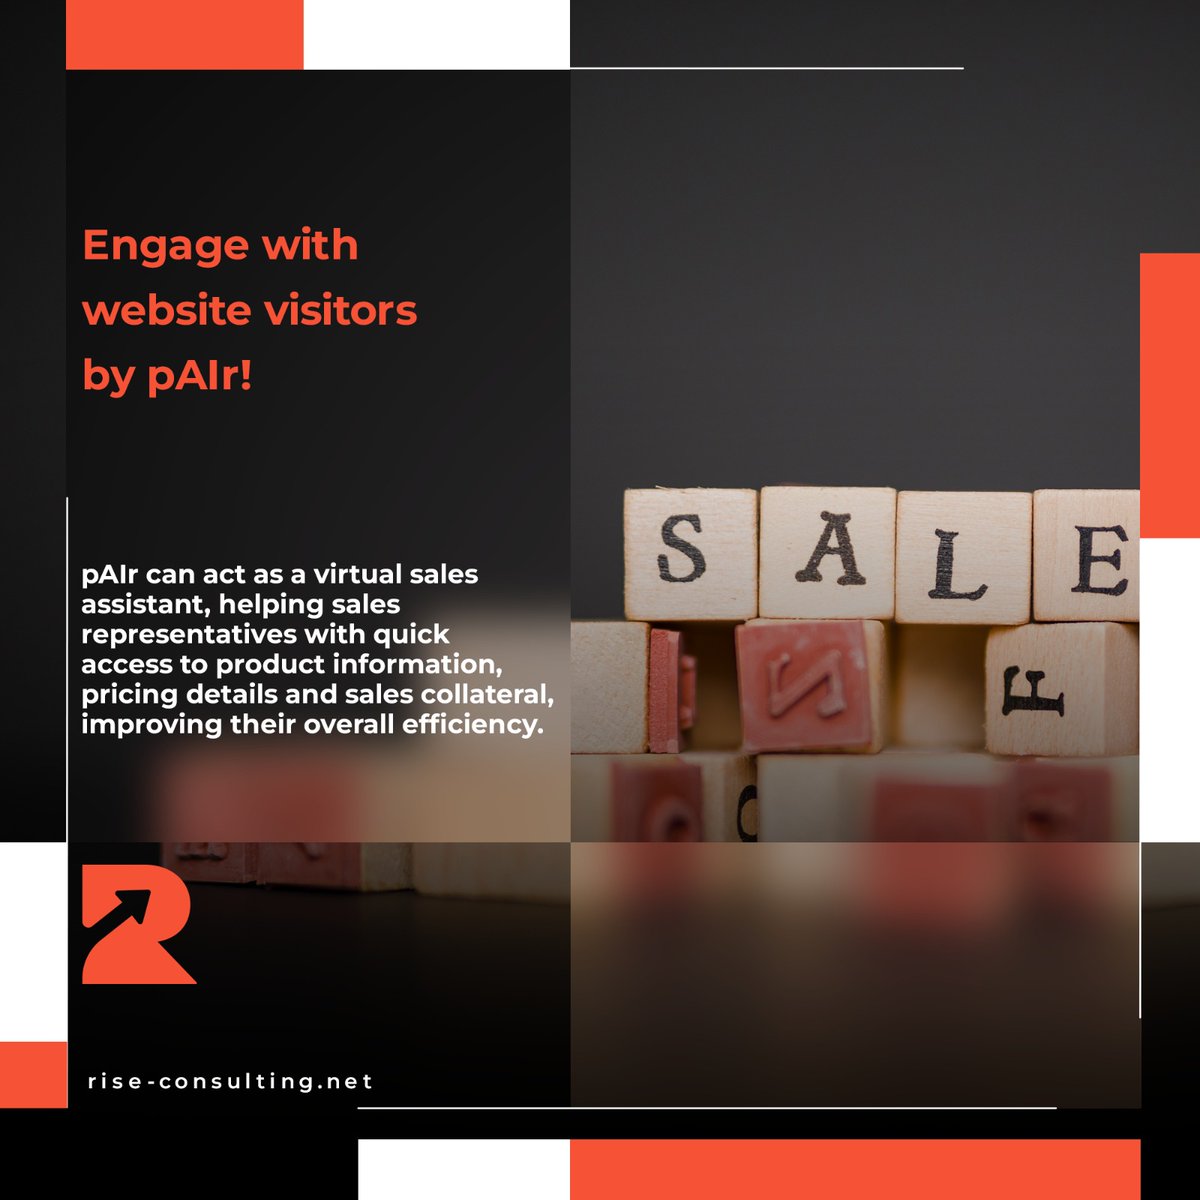 pAIr can engage with website visitors and qualify leads by asking relevant questions and identifying potential customers who are more likely to convert. 

#developer #digitaltransformation #technology #riseconsulting #riseacademy #RiseWithUs #aiasistant #pAIr #AI